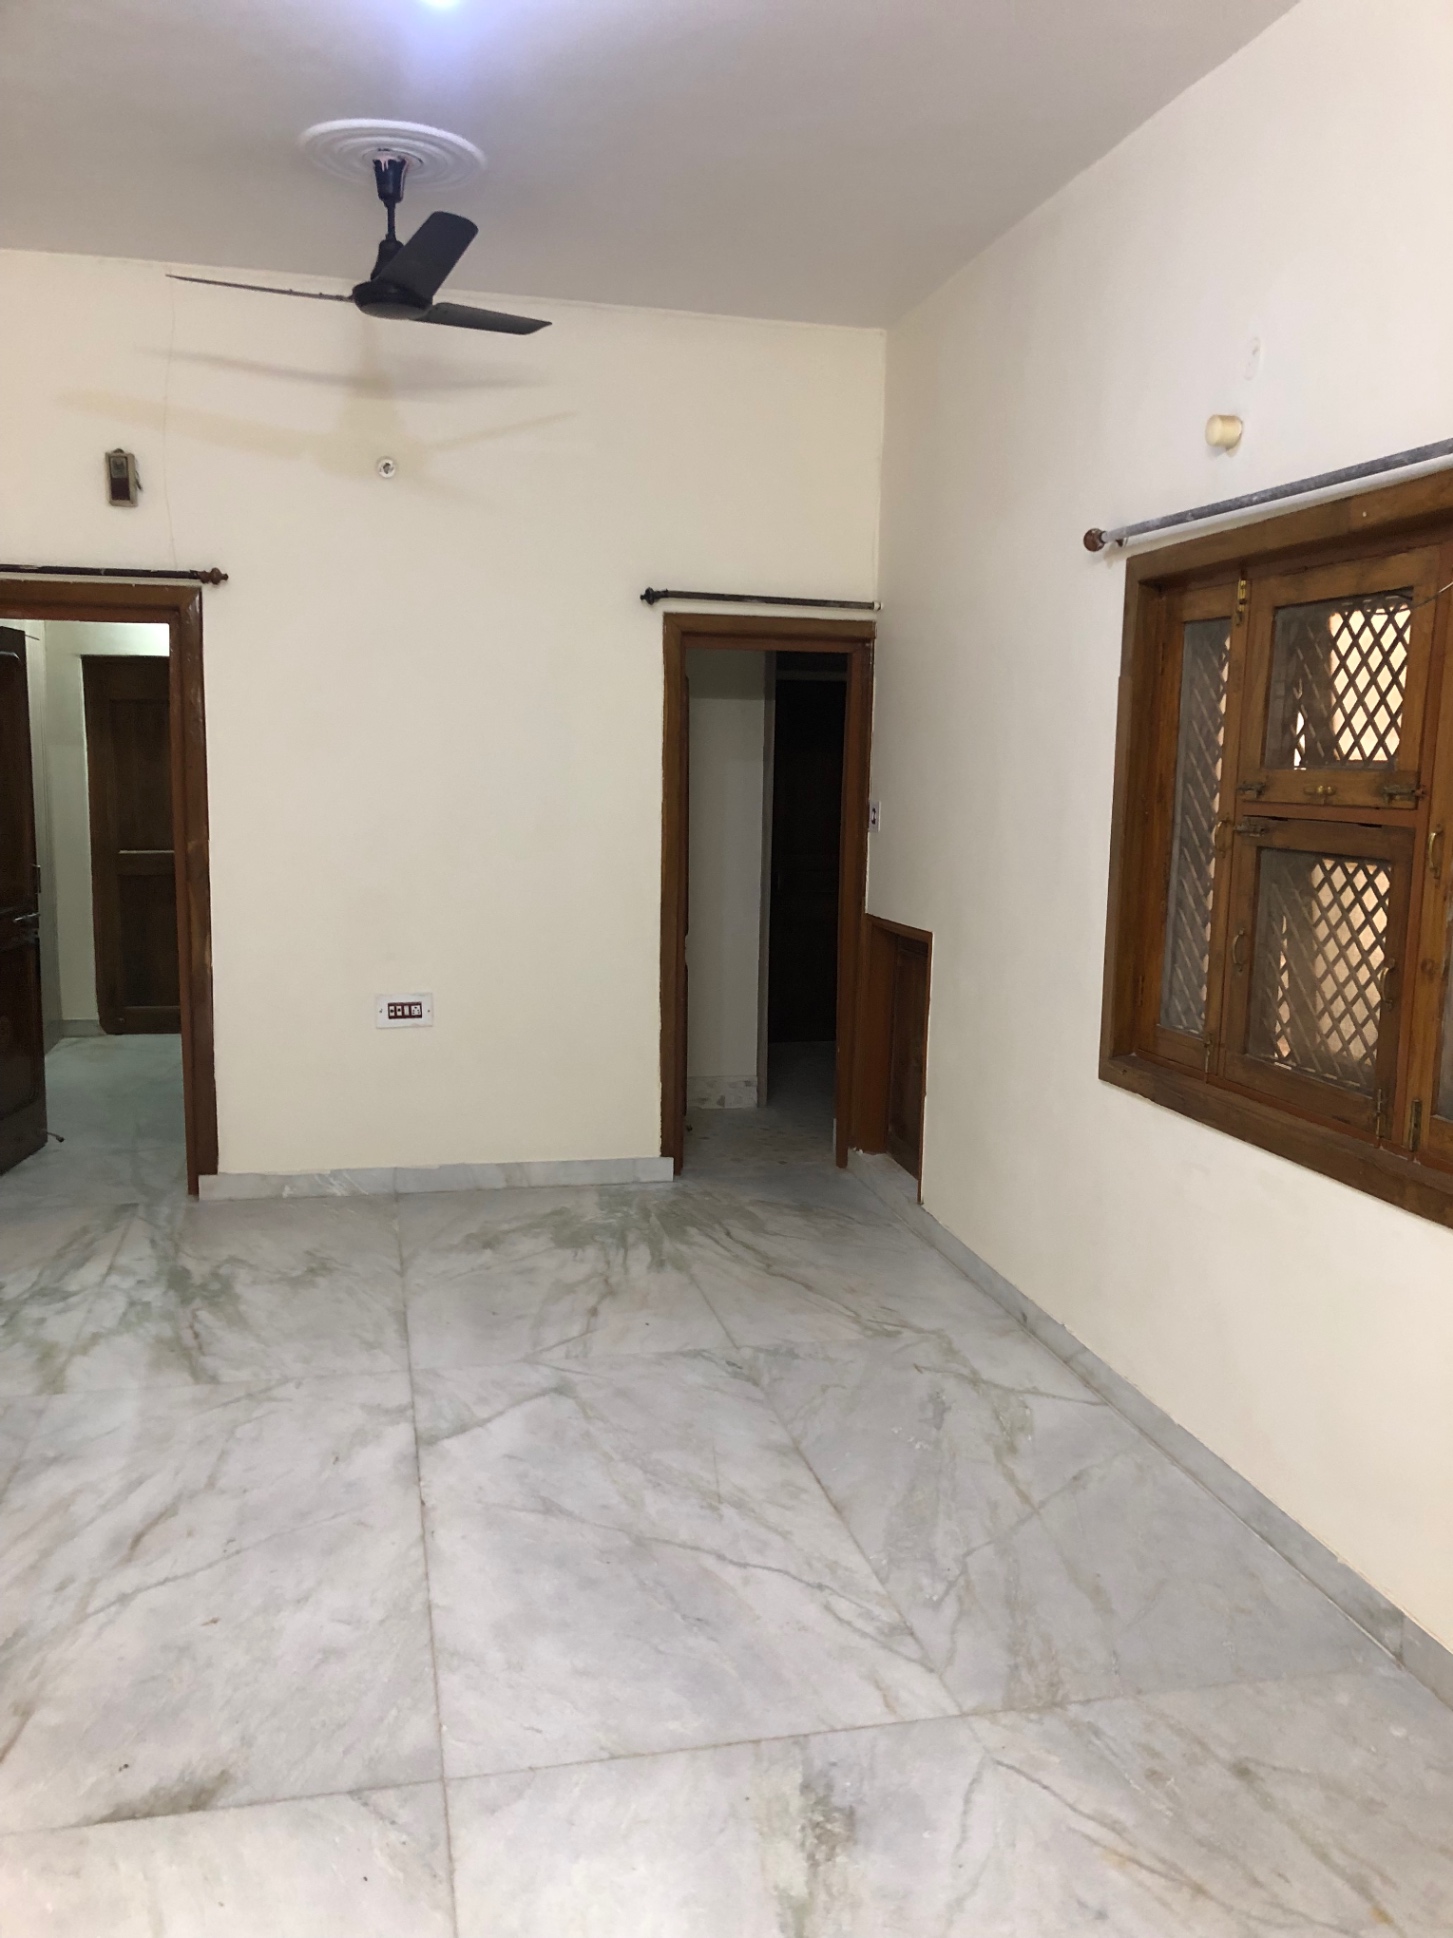 3 Bed/ 2 Bath Rent House/ Bungalow/ Villa, Semi Furnished for rent @10 number